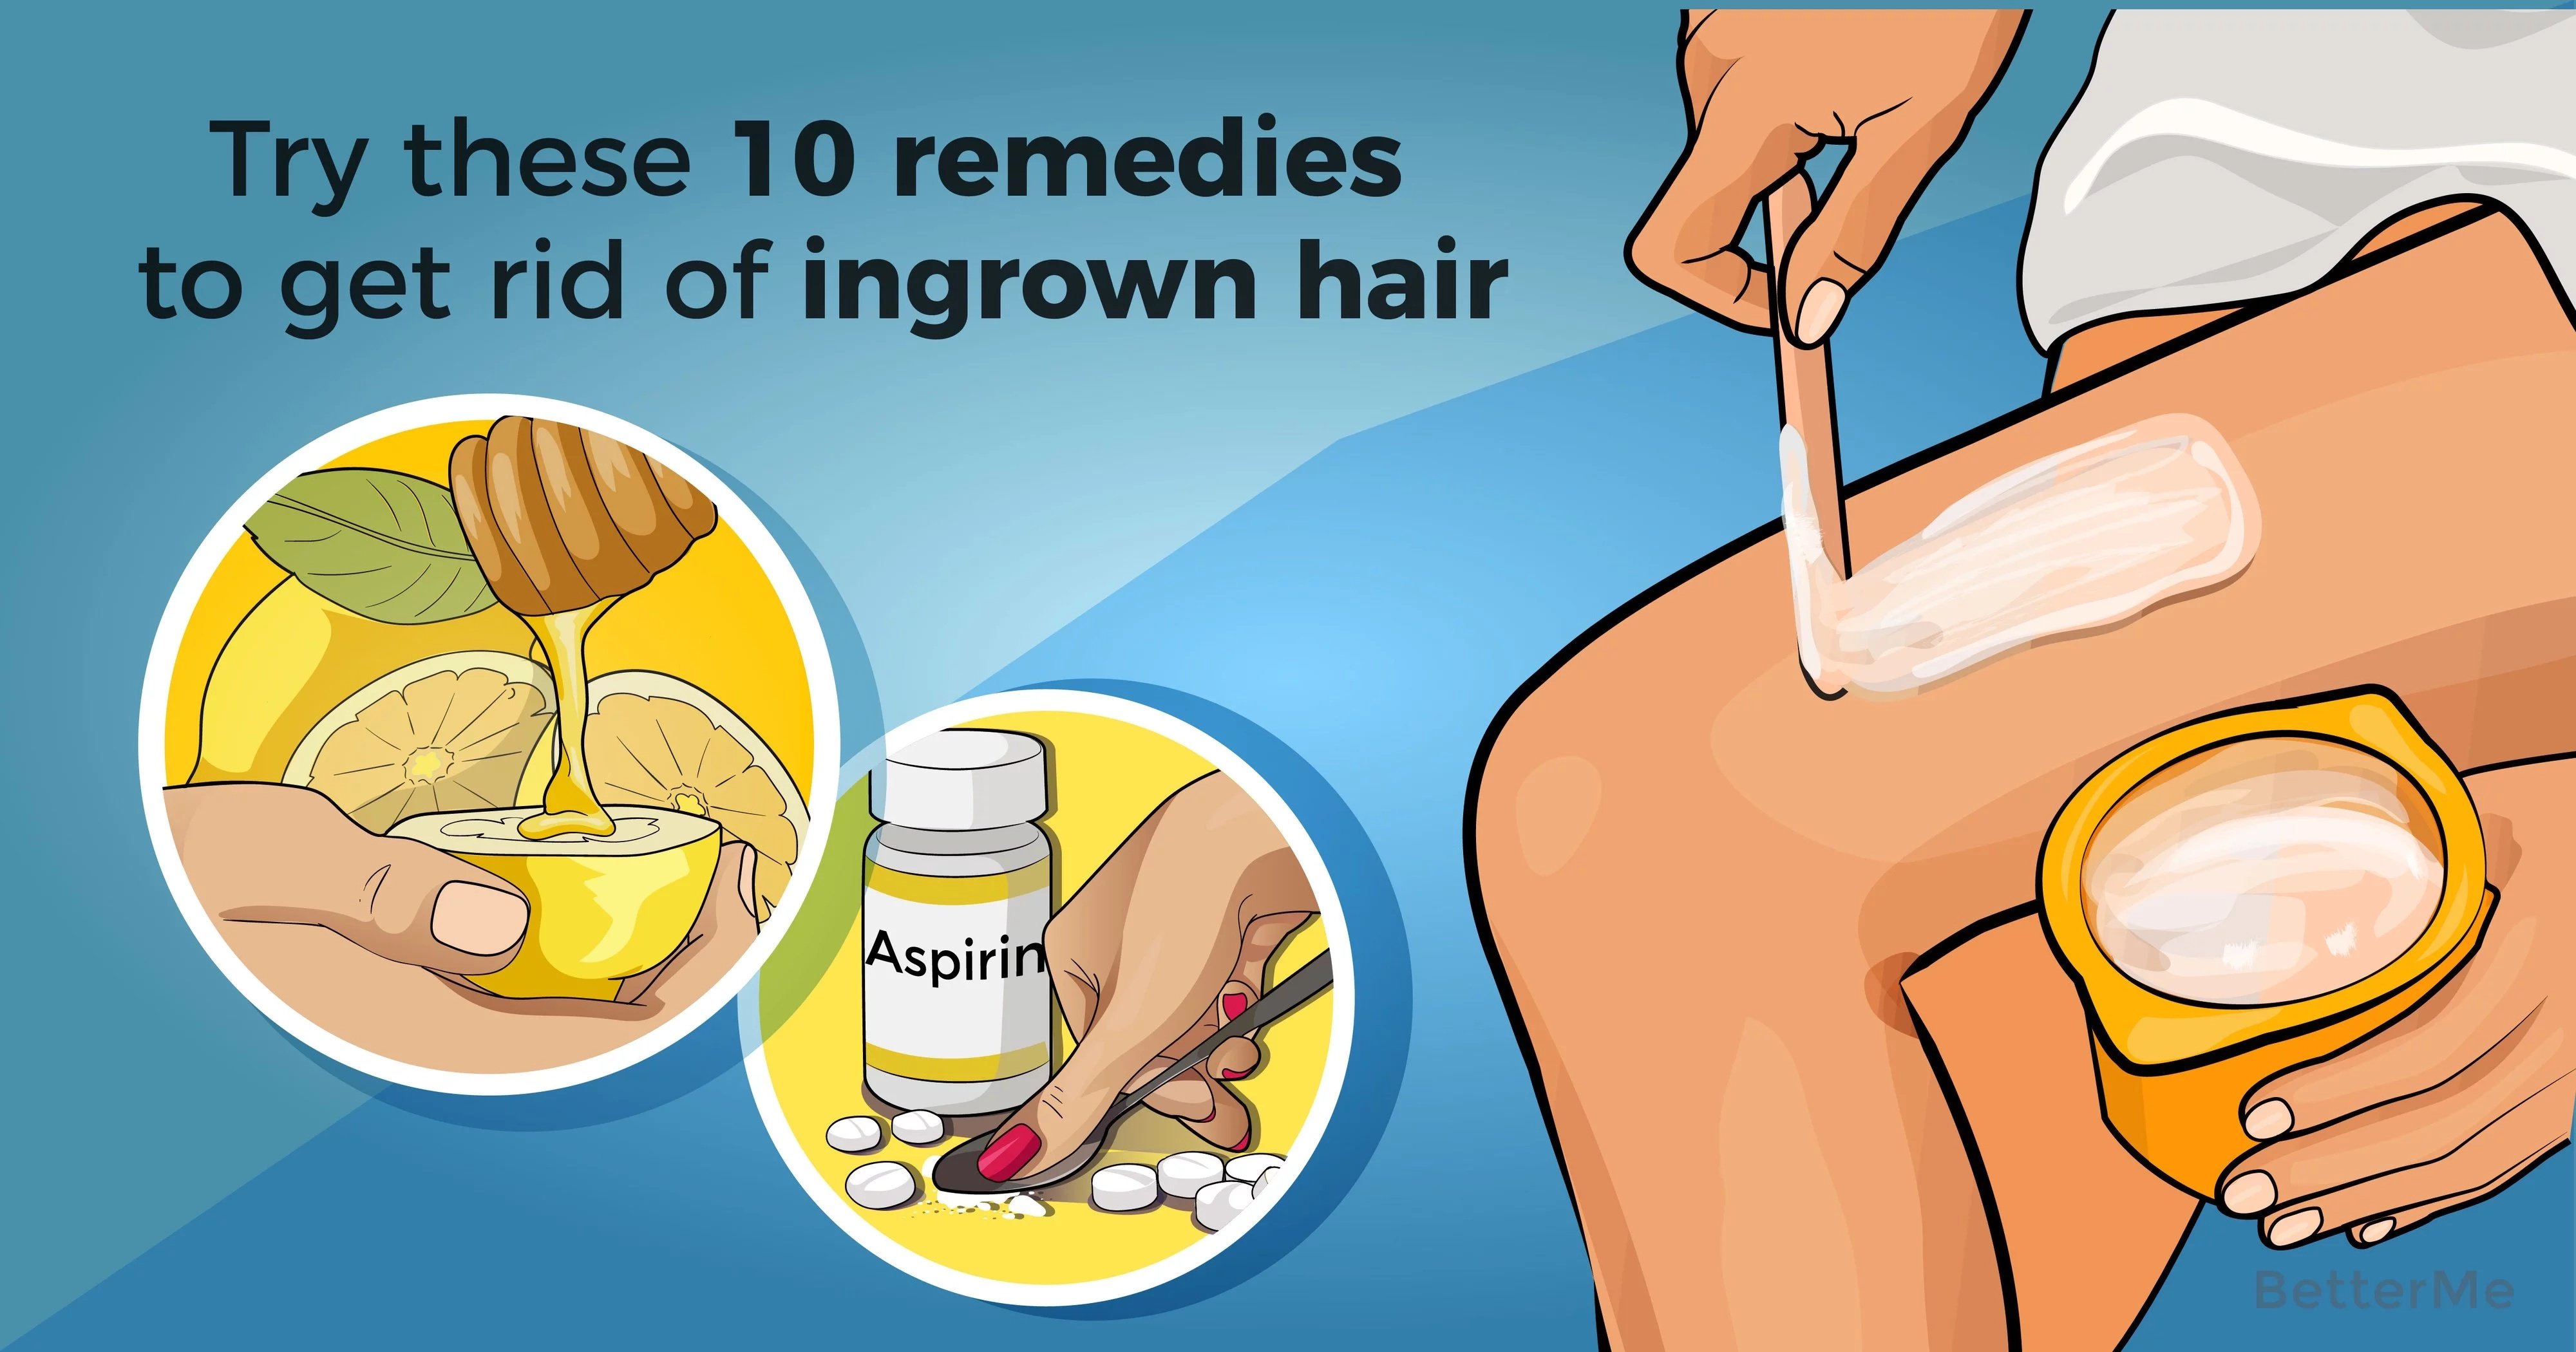 Try these 10 remedies to get rid of ingrown hair